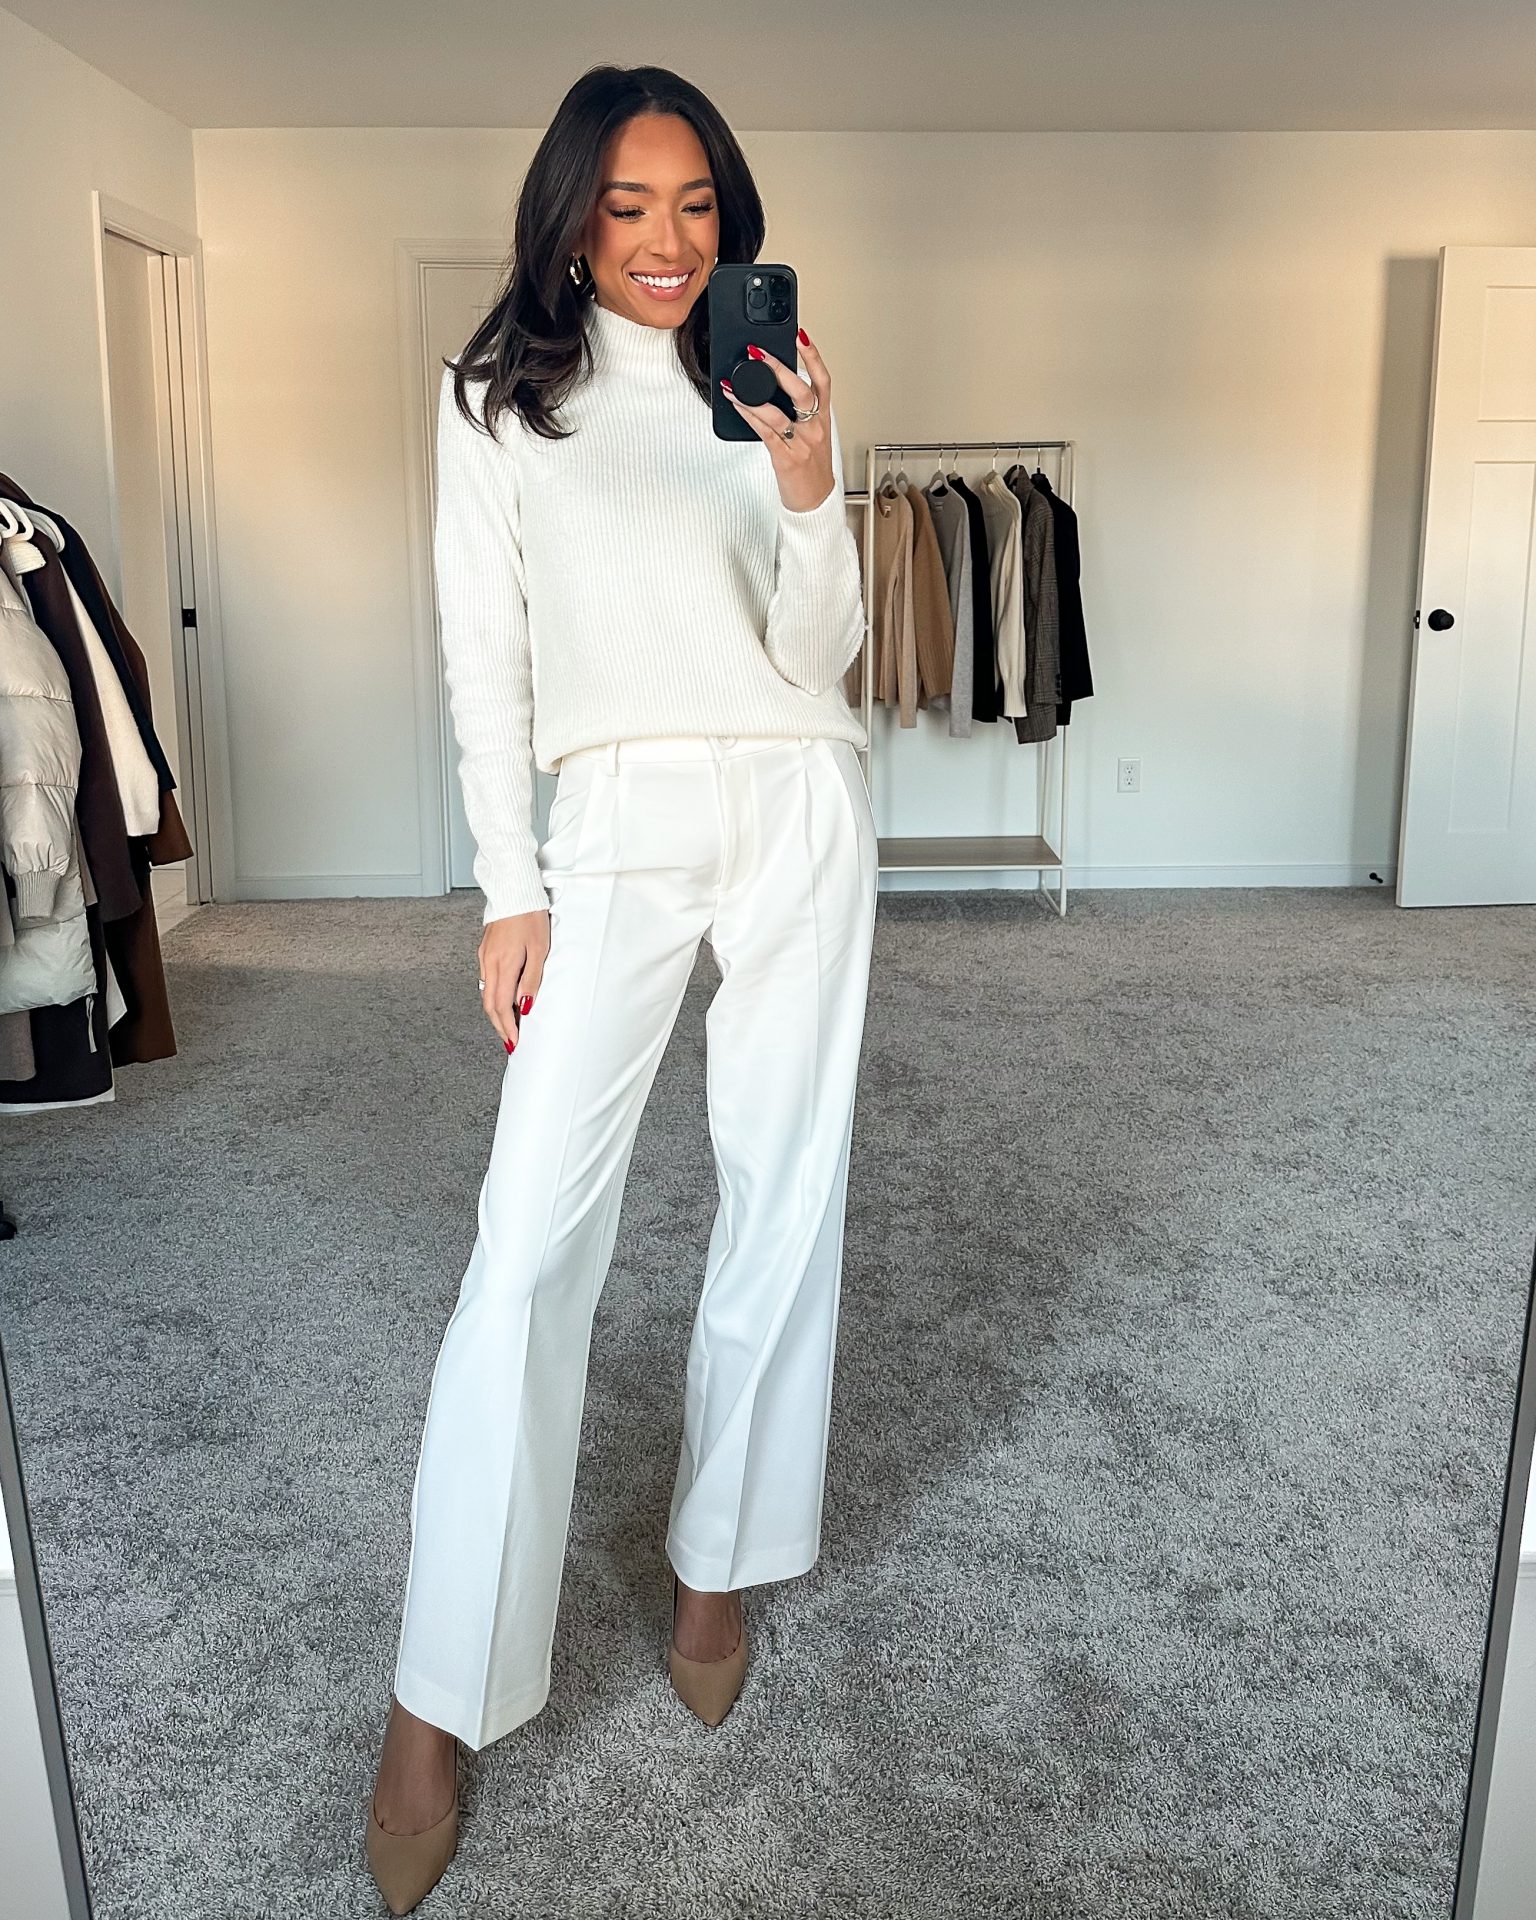 Winter White Work Outfit - Nena Evans